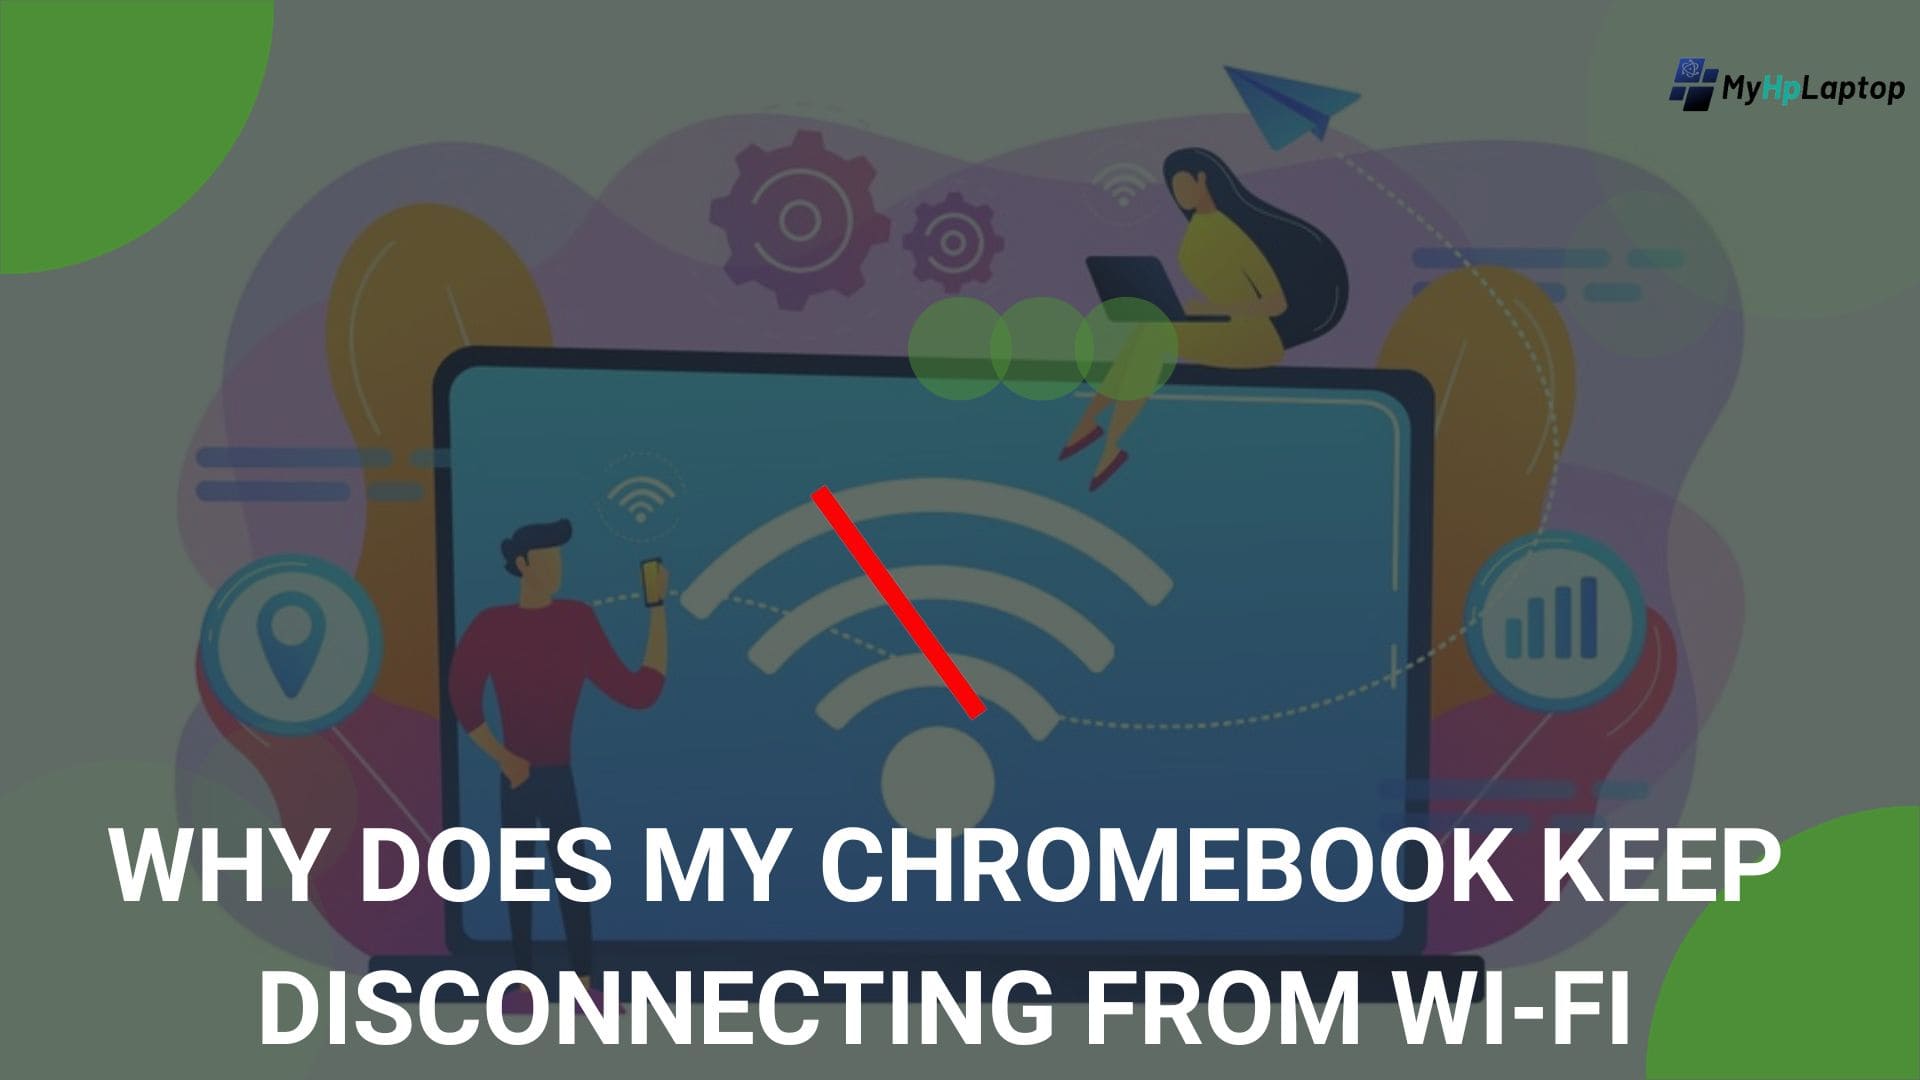 Why Does My Chromebook Keep Disconnecting from Wi-Fi